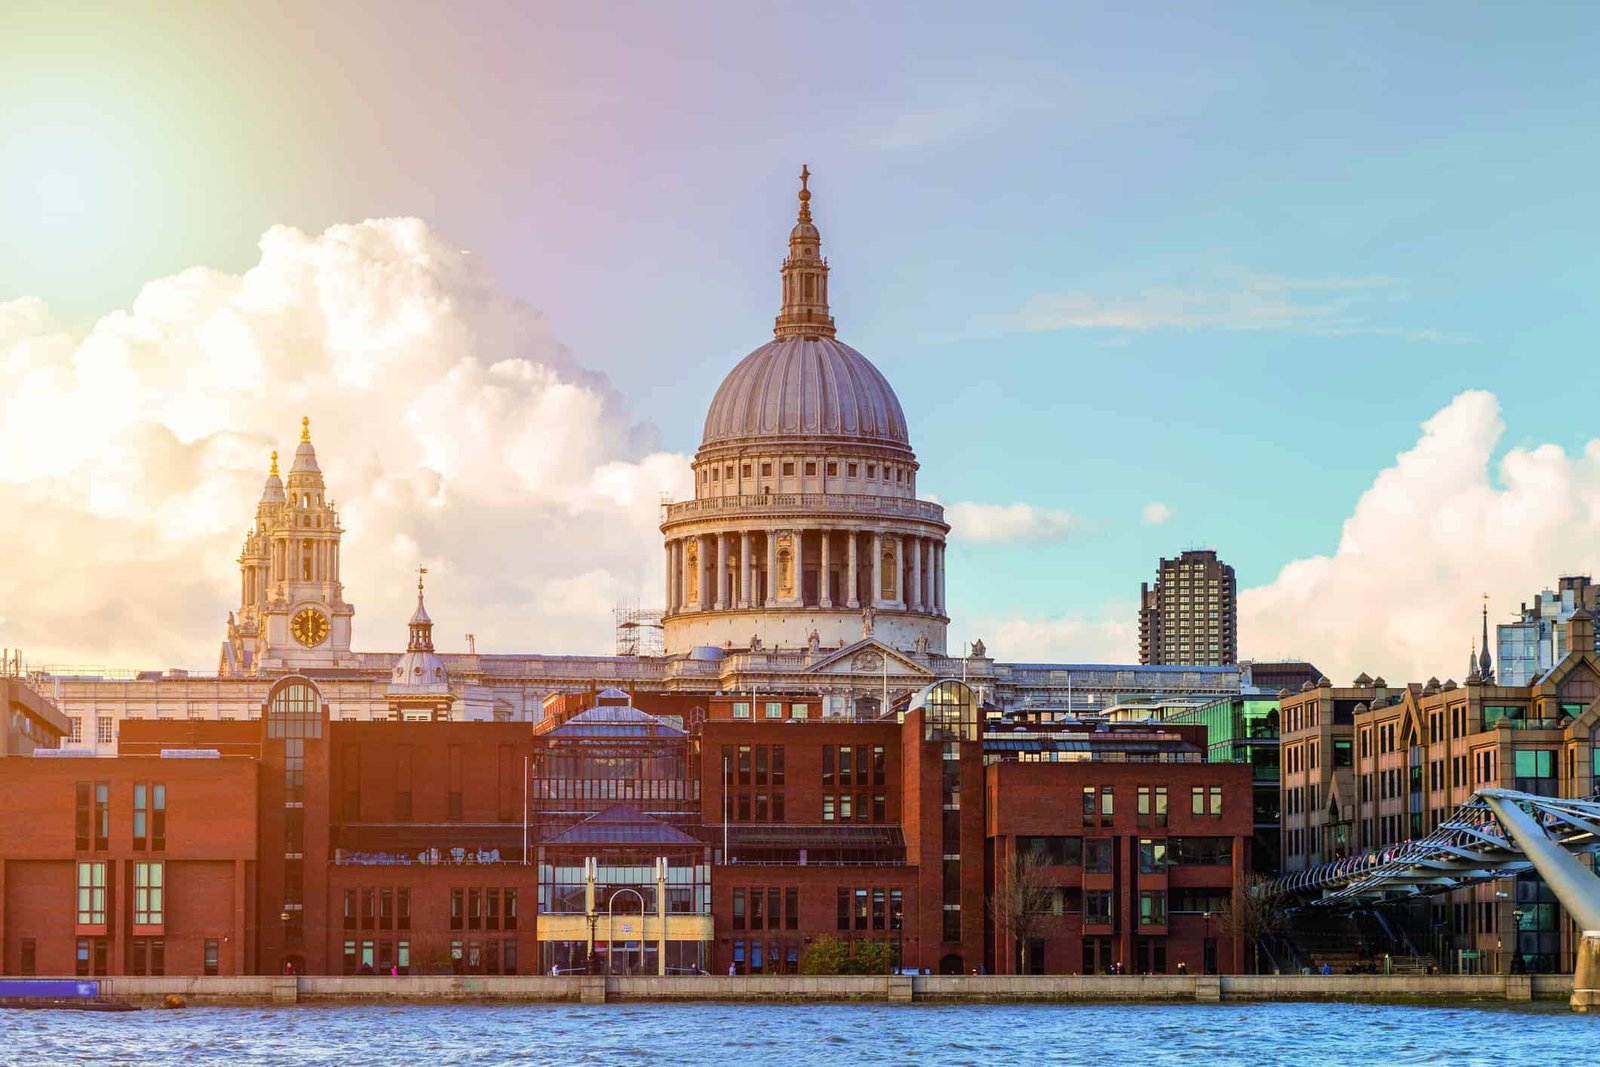 St Paul's Cathedral in London is a breathtaking architectural masterpiece that holds great significance. Whether you are seeking solace in its sacred halls or marveling at the stunning artistry, this iconic landmark embodies fulfilling